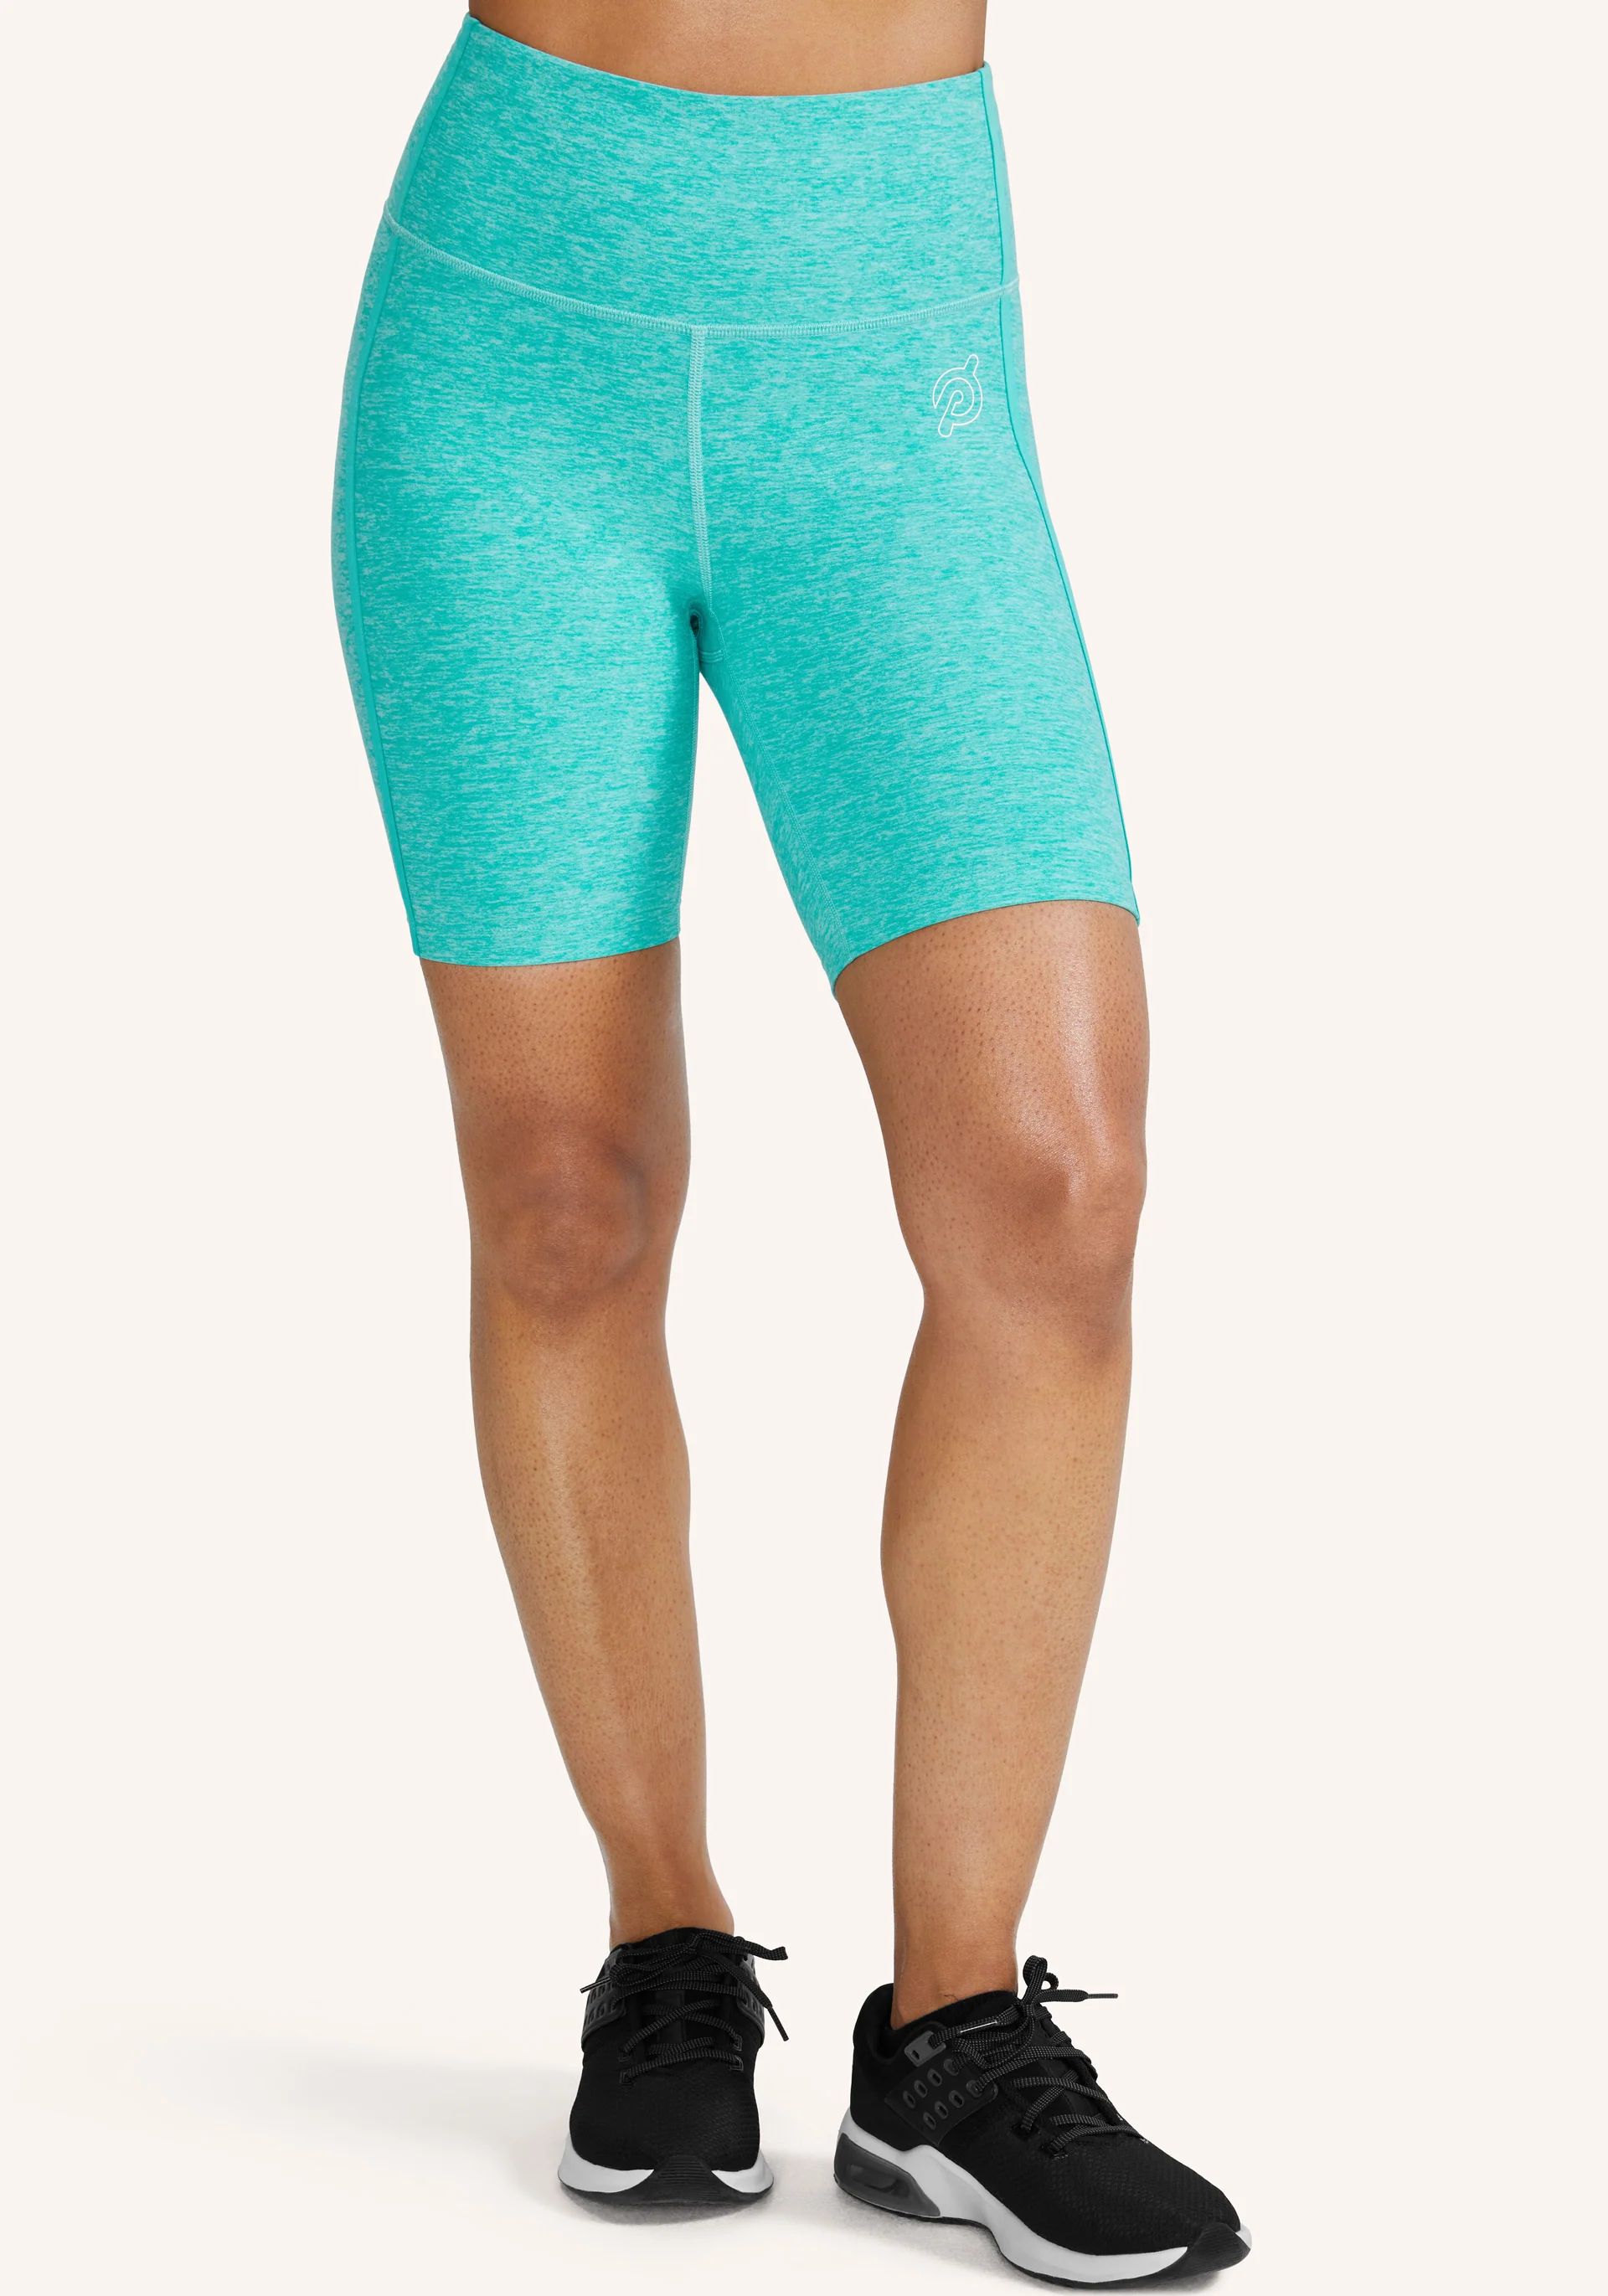 Drive And Recover 7" High Rise Bike Short | Peloton Apparel